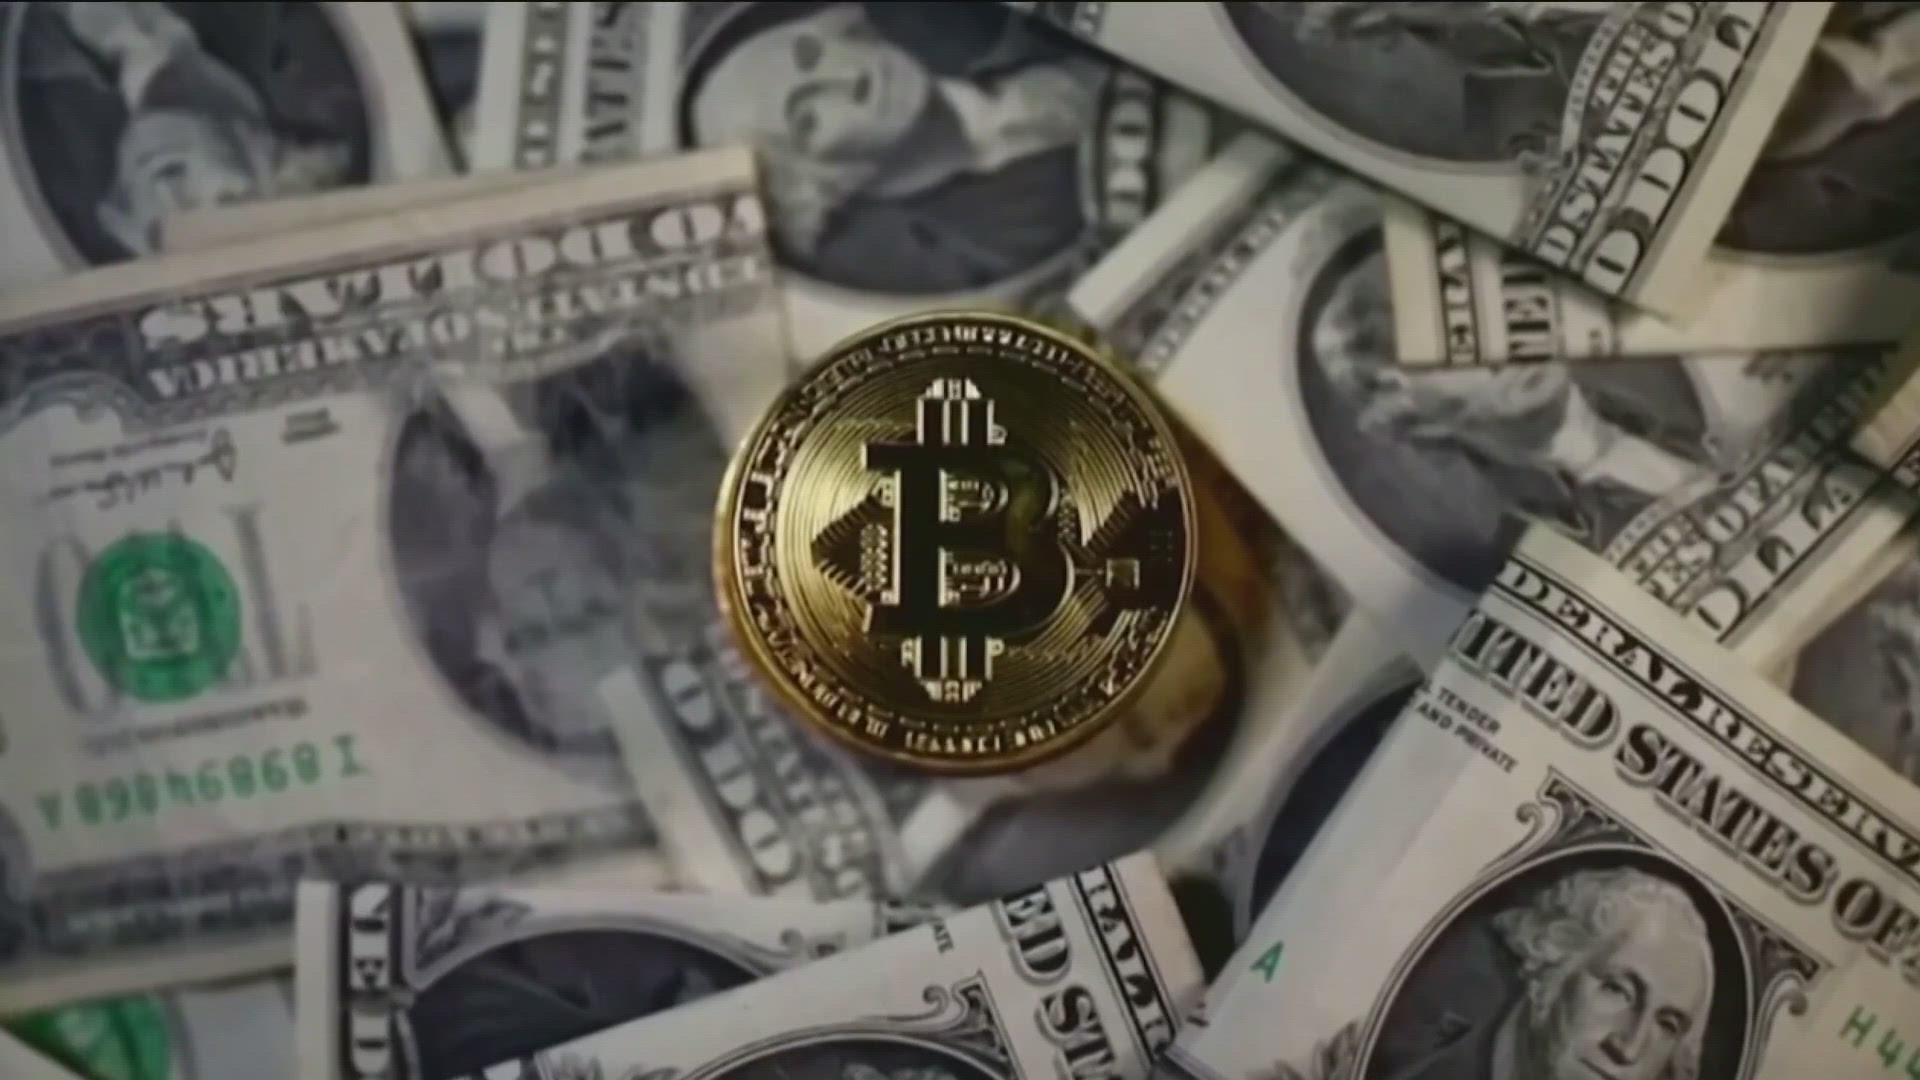 A bill that's been sent to the governor's desk aims to regulate crypto banking in Texas. It comes after the collapse of FTX.